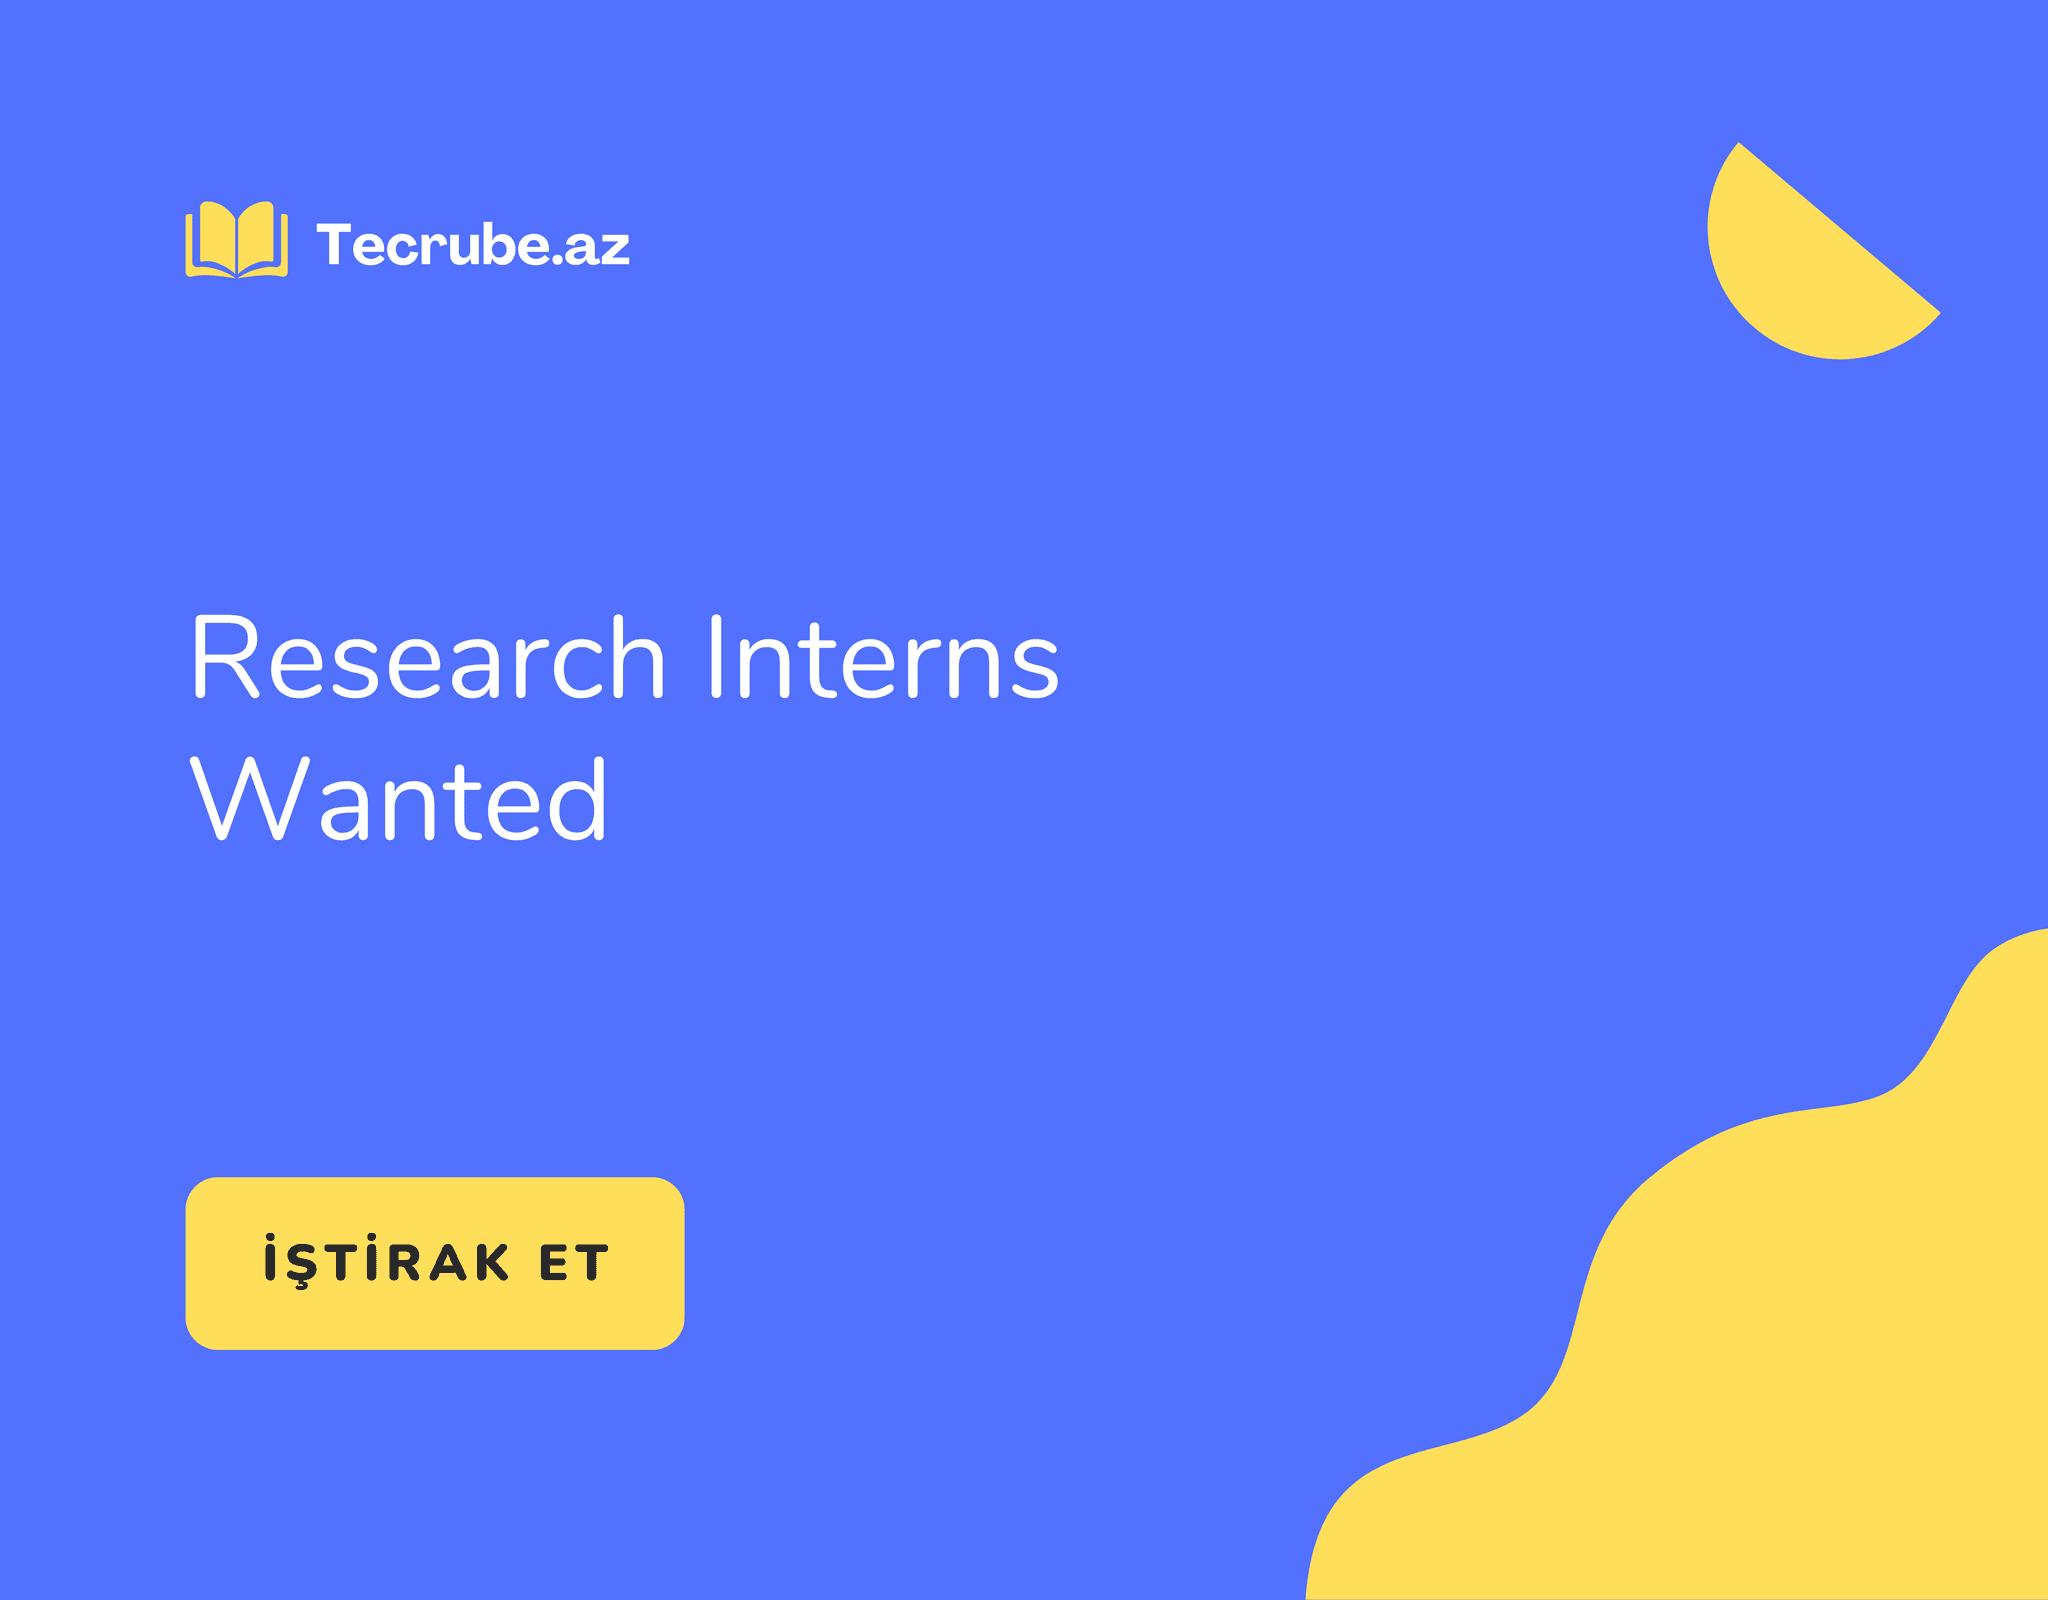 Research Interns Wanted